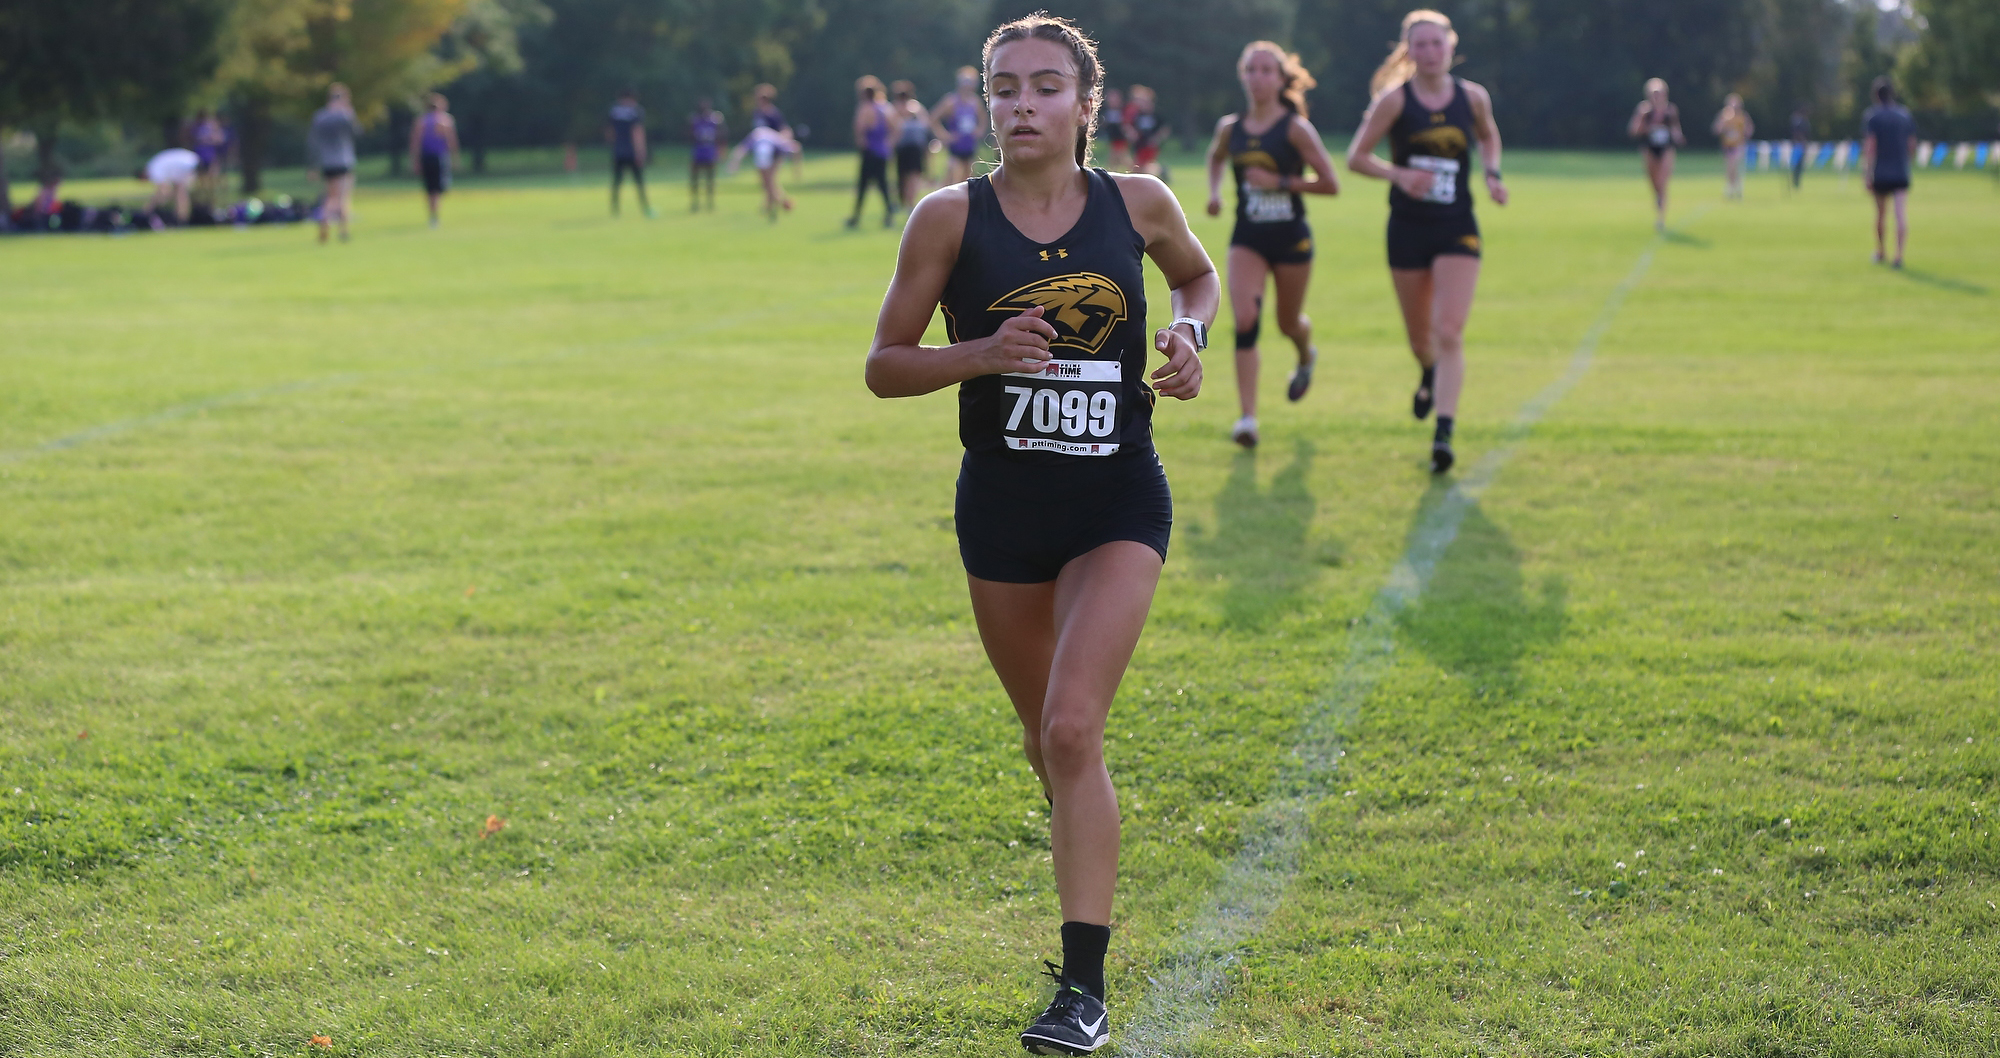 Amanda Van Den Plas led UW-Oshkosh with her 94th-place finish among the 375 competing runners at the Roy Griak Invitational.